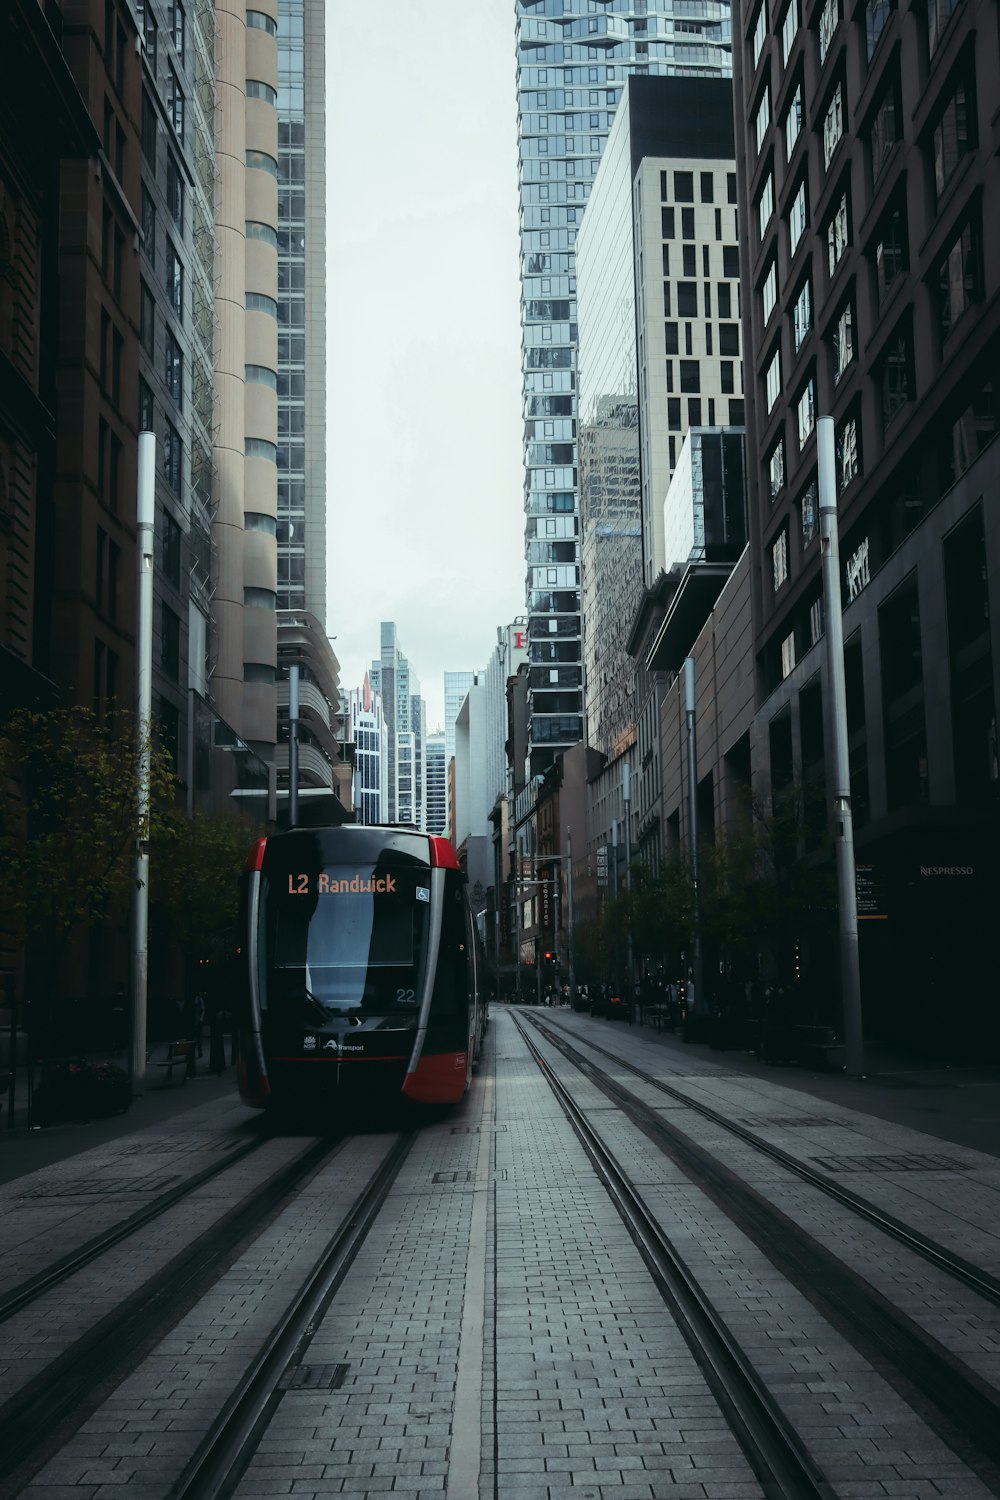 black and white tram on road between high rise buildings during daytime